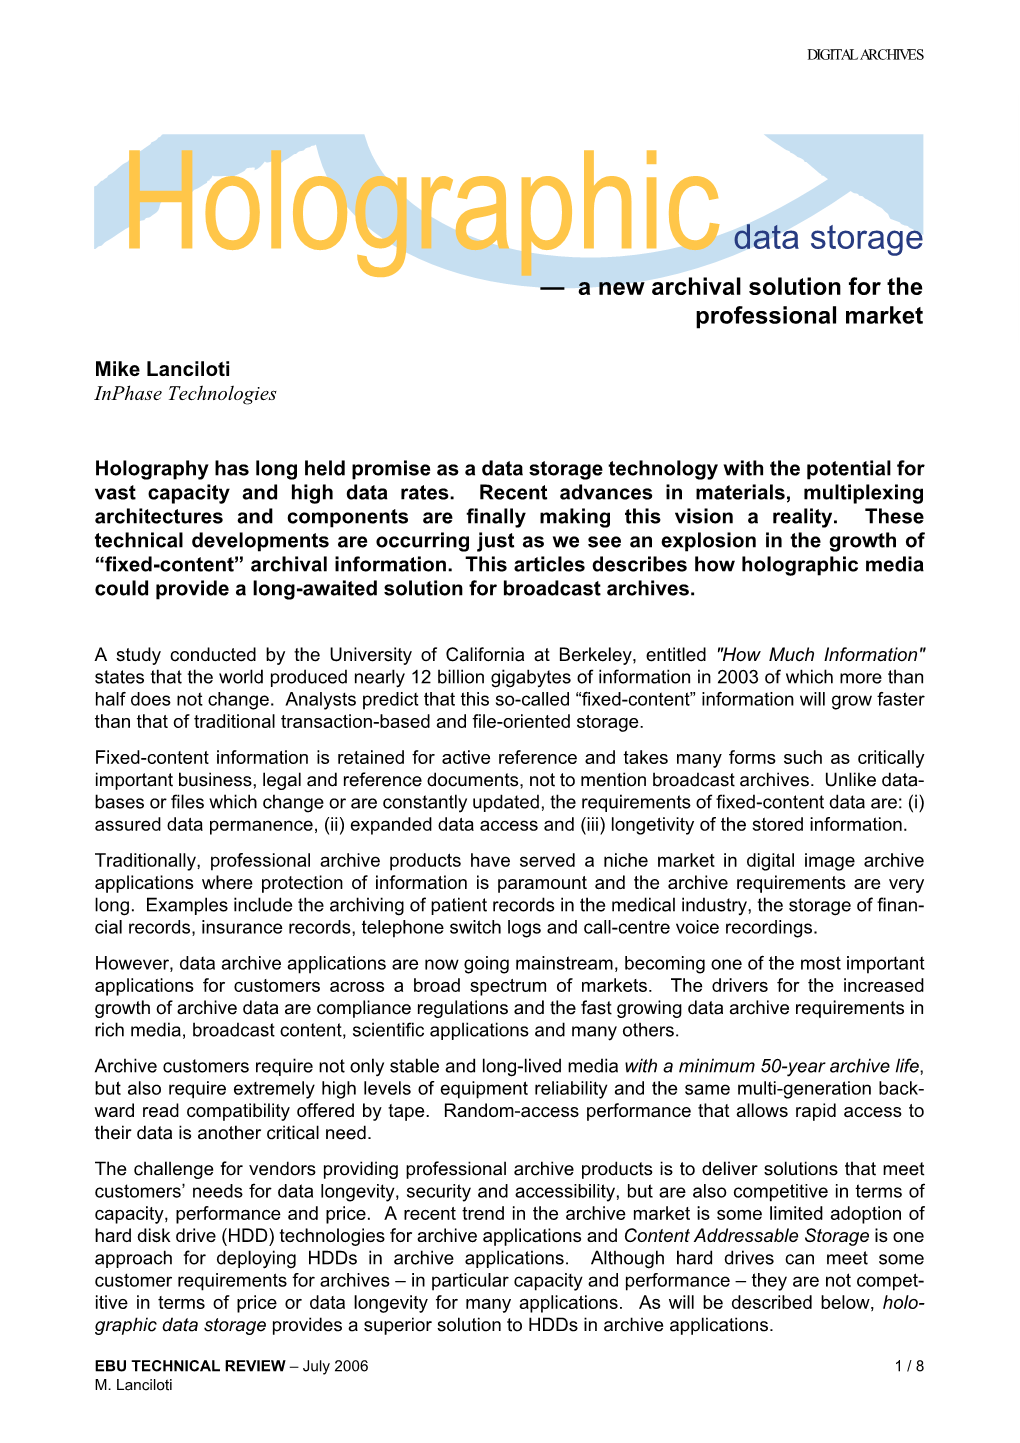 Holographic Data Storage — a New Archival Solution for the Professional Market